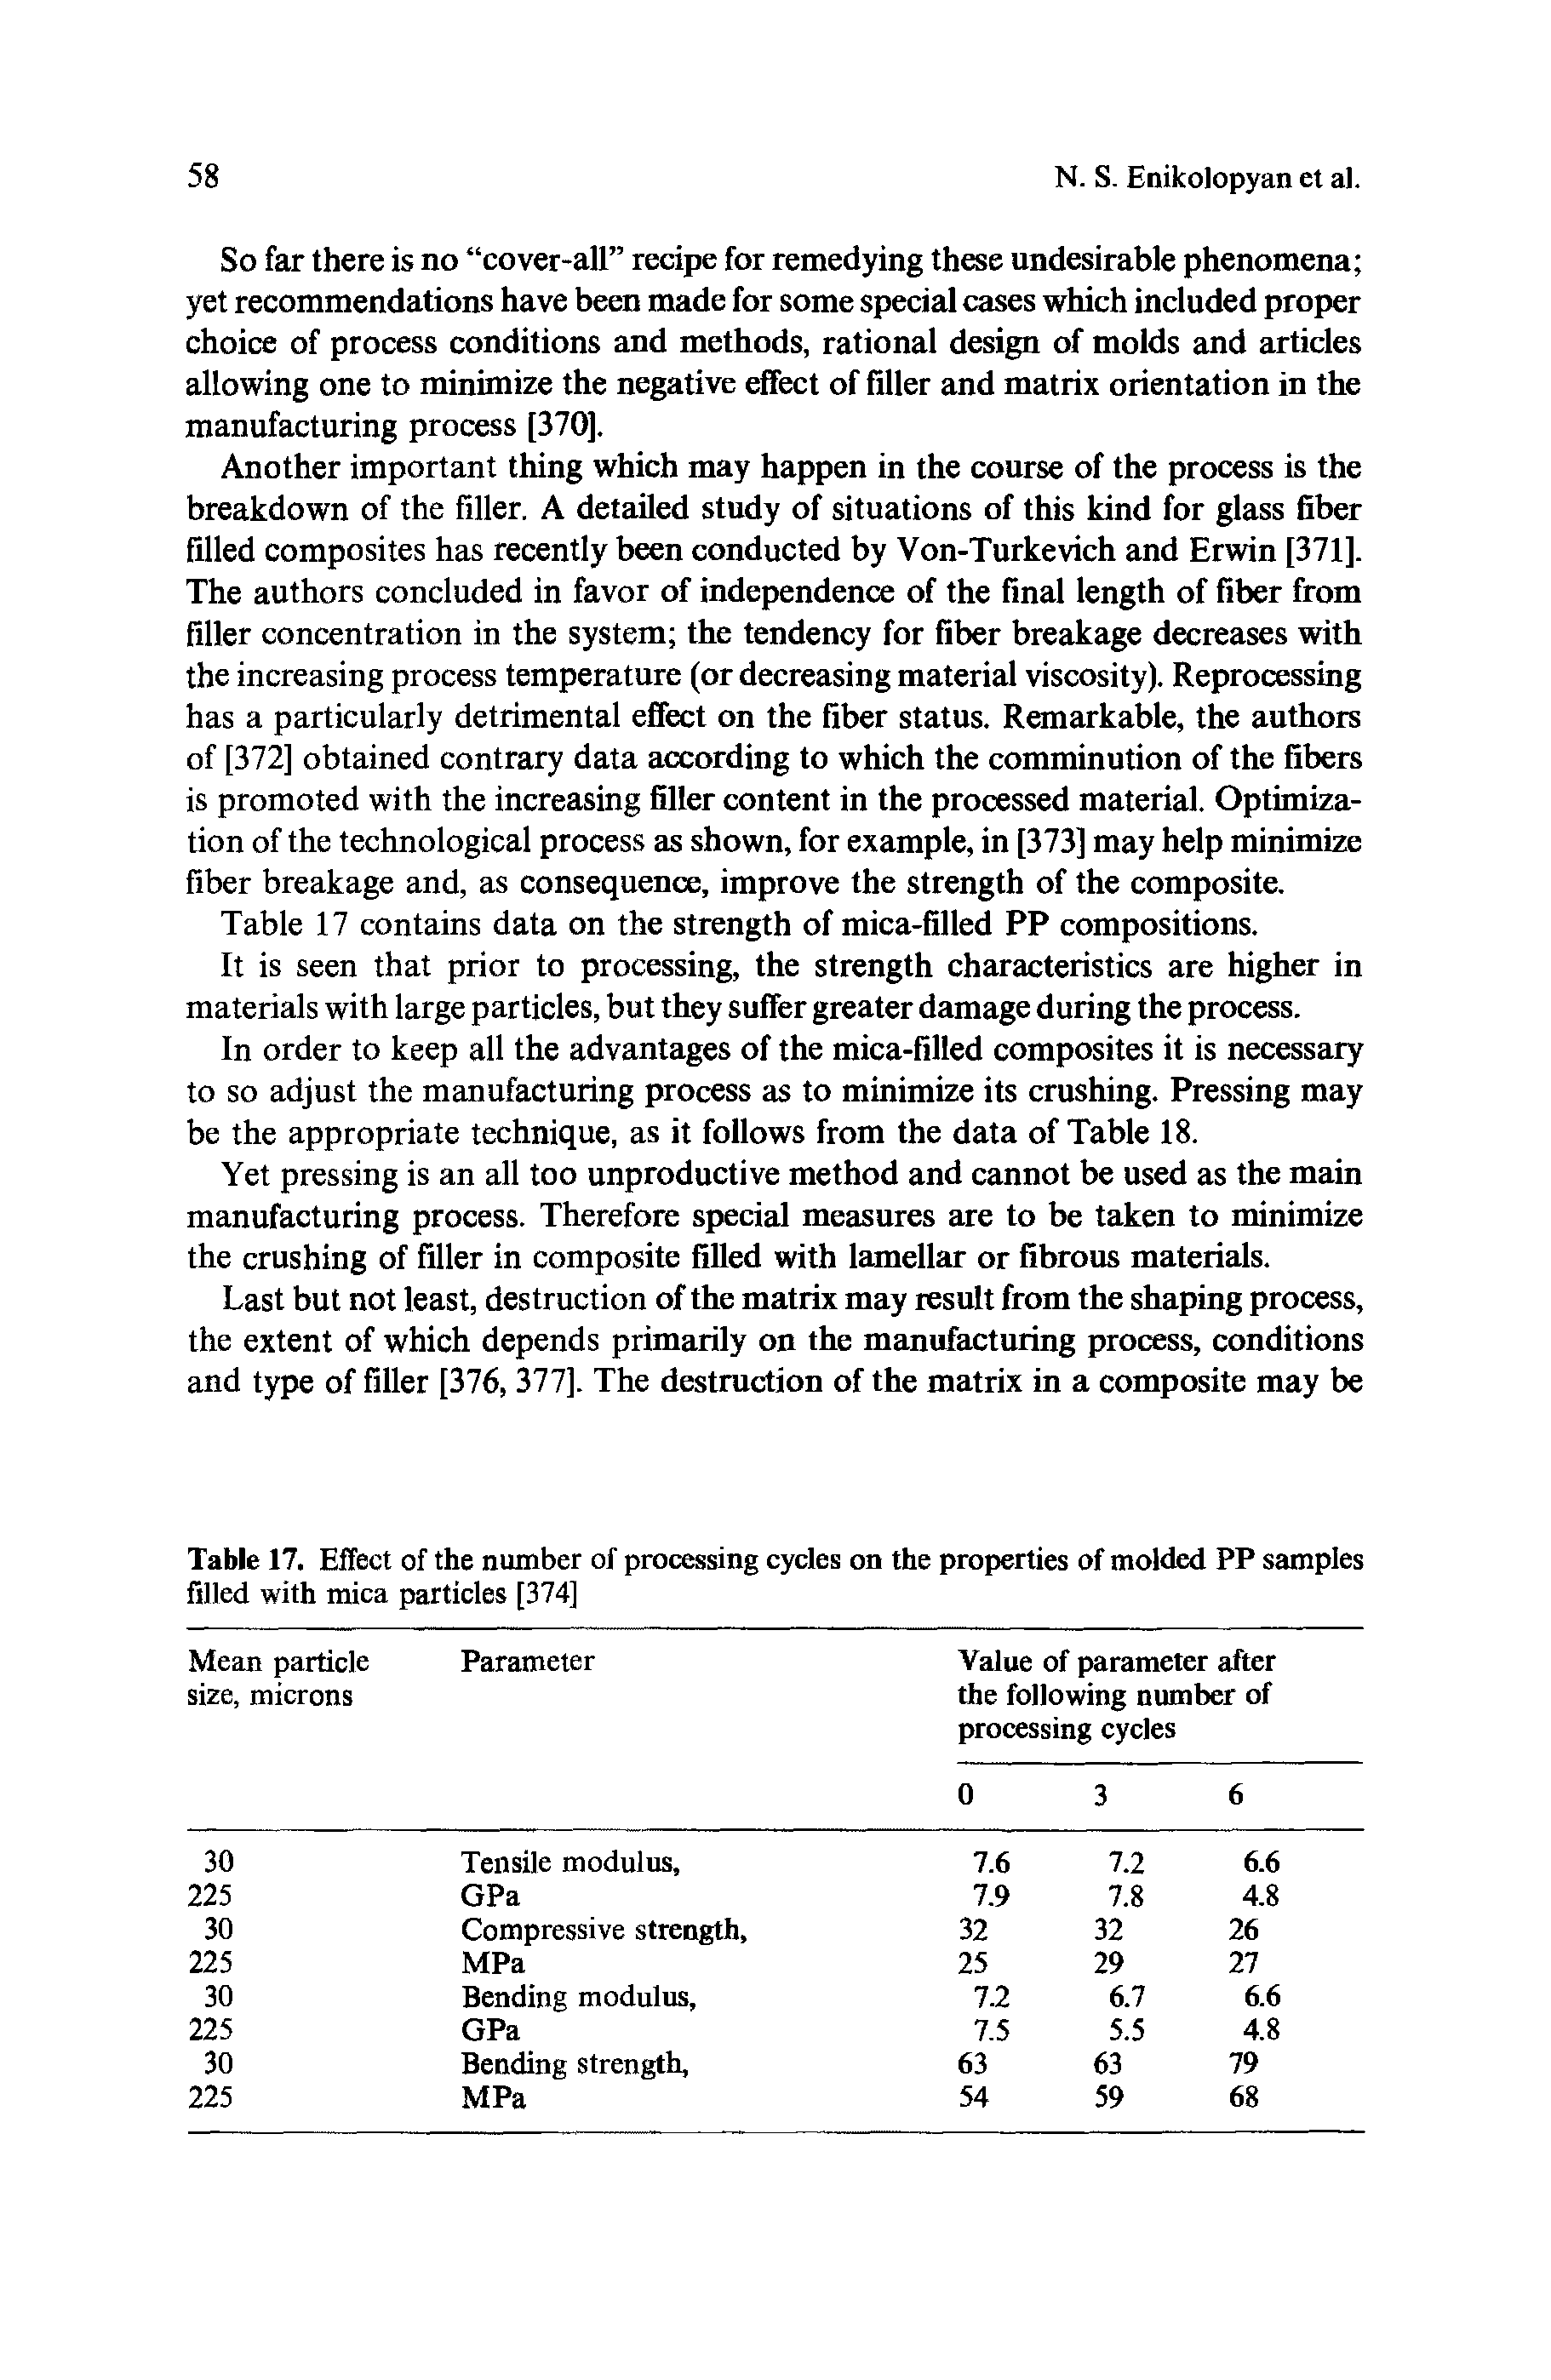 Table 17. Effect of the number of processing cycles on the properties of molded PP samples filled with mica particles [374]...